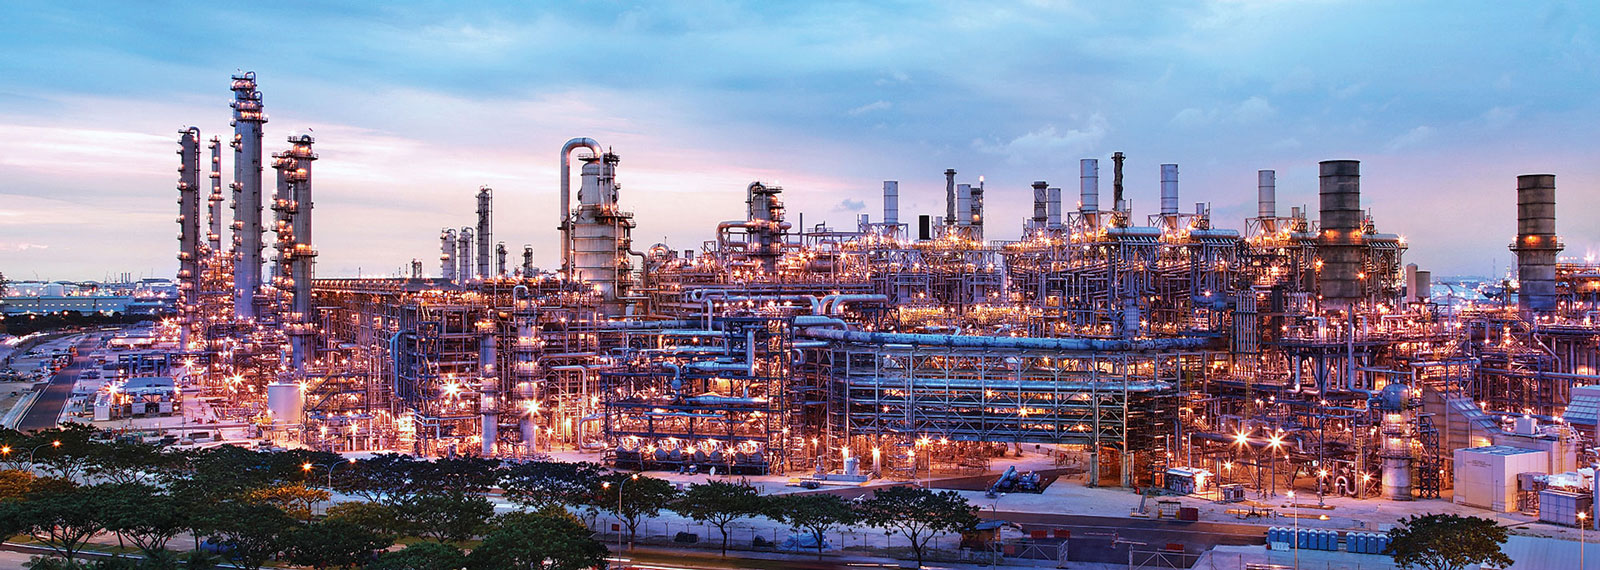 OIL, GAS, REFINING & PETROCHEMICAL